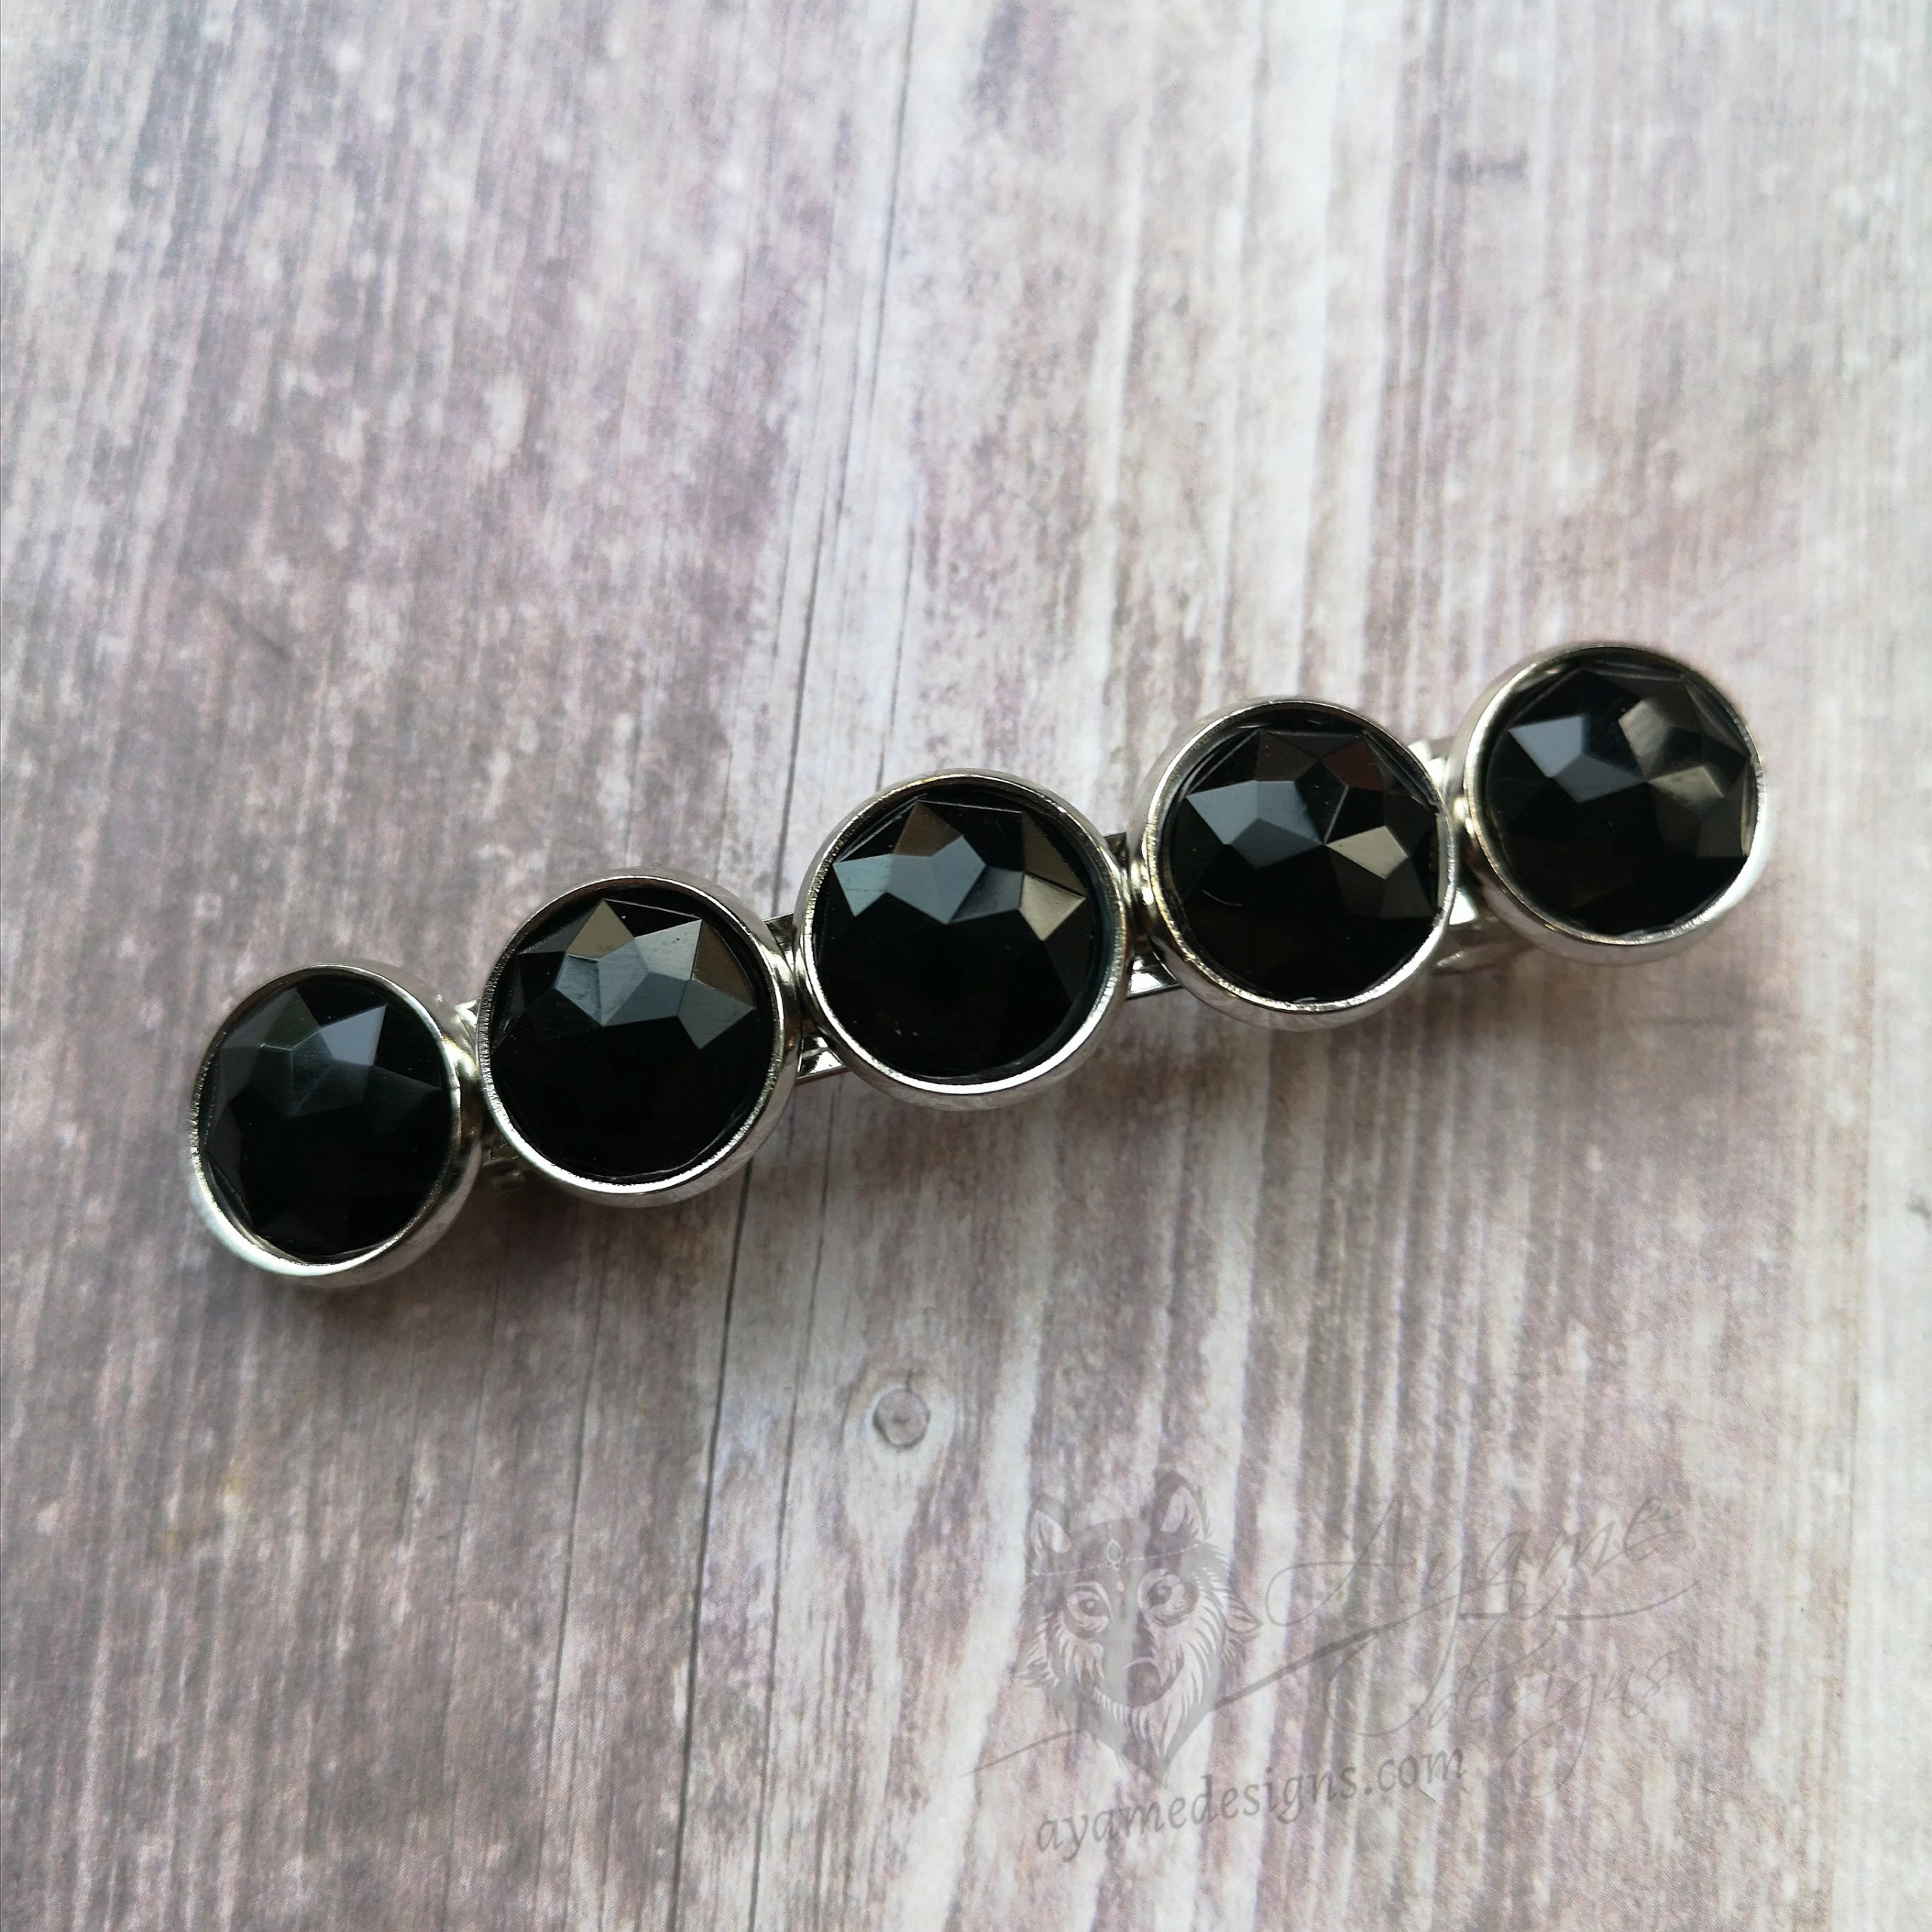 Hair barrette with black faceted resin cabochons